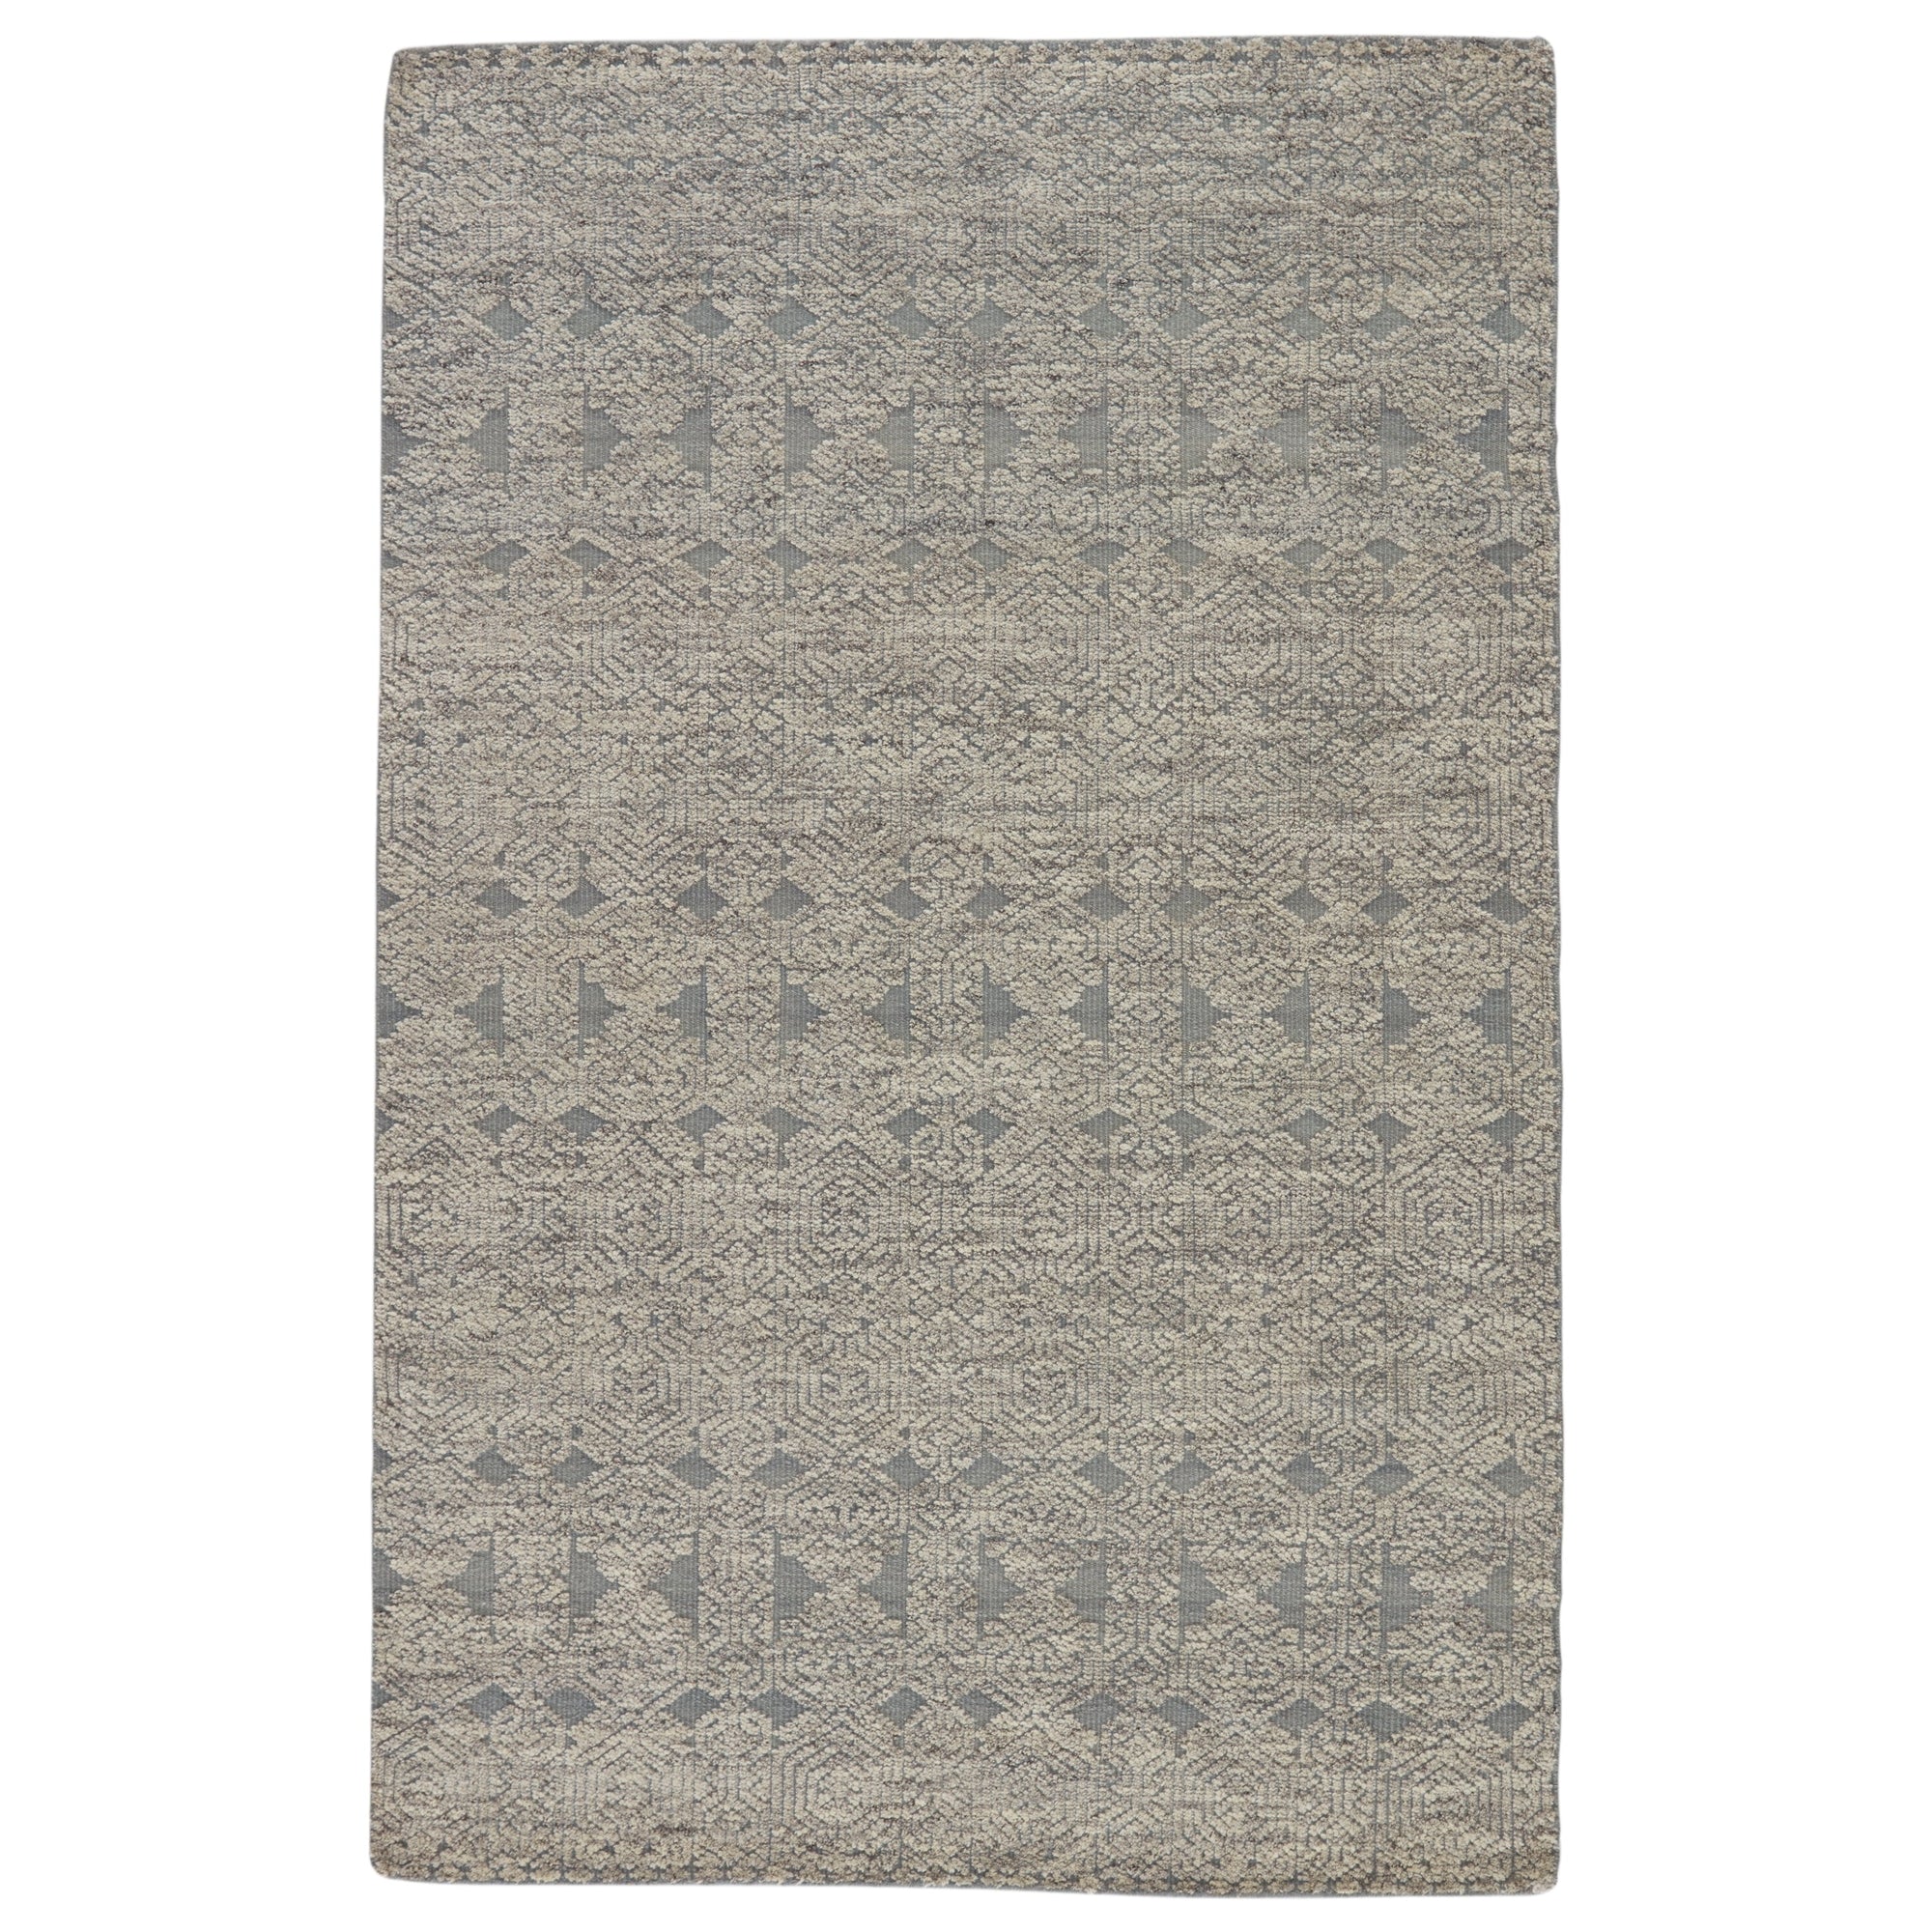 Rugs by Roo | Jaipur Living Abelle Hand-Knotted Medallion Gray White Area Rug-RUG150486